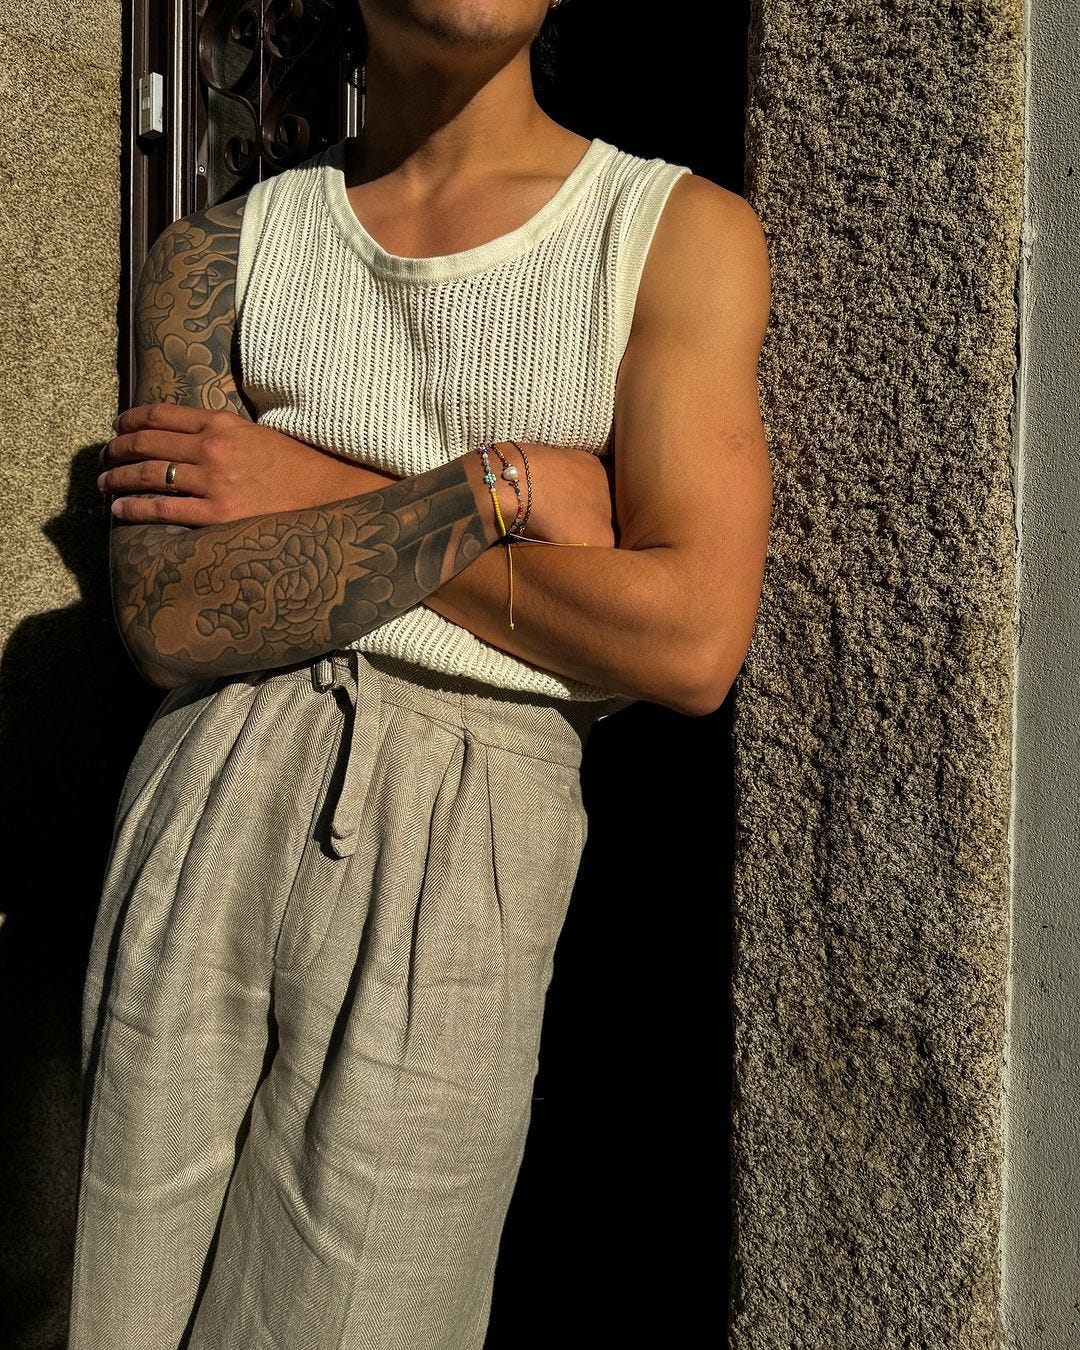 closeup of a man standing in a doorway outside, wearing a white bucket cap, knit sleeveless shirt, and tan linen pants